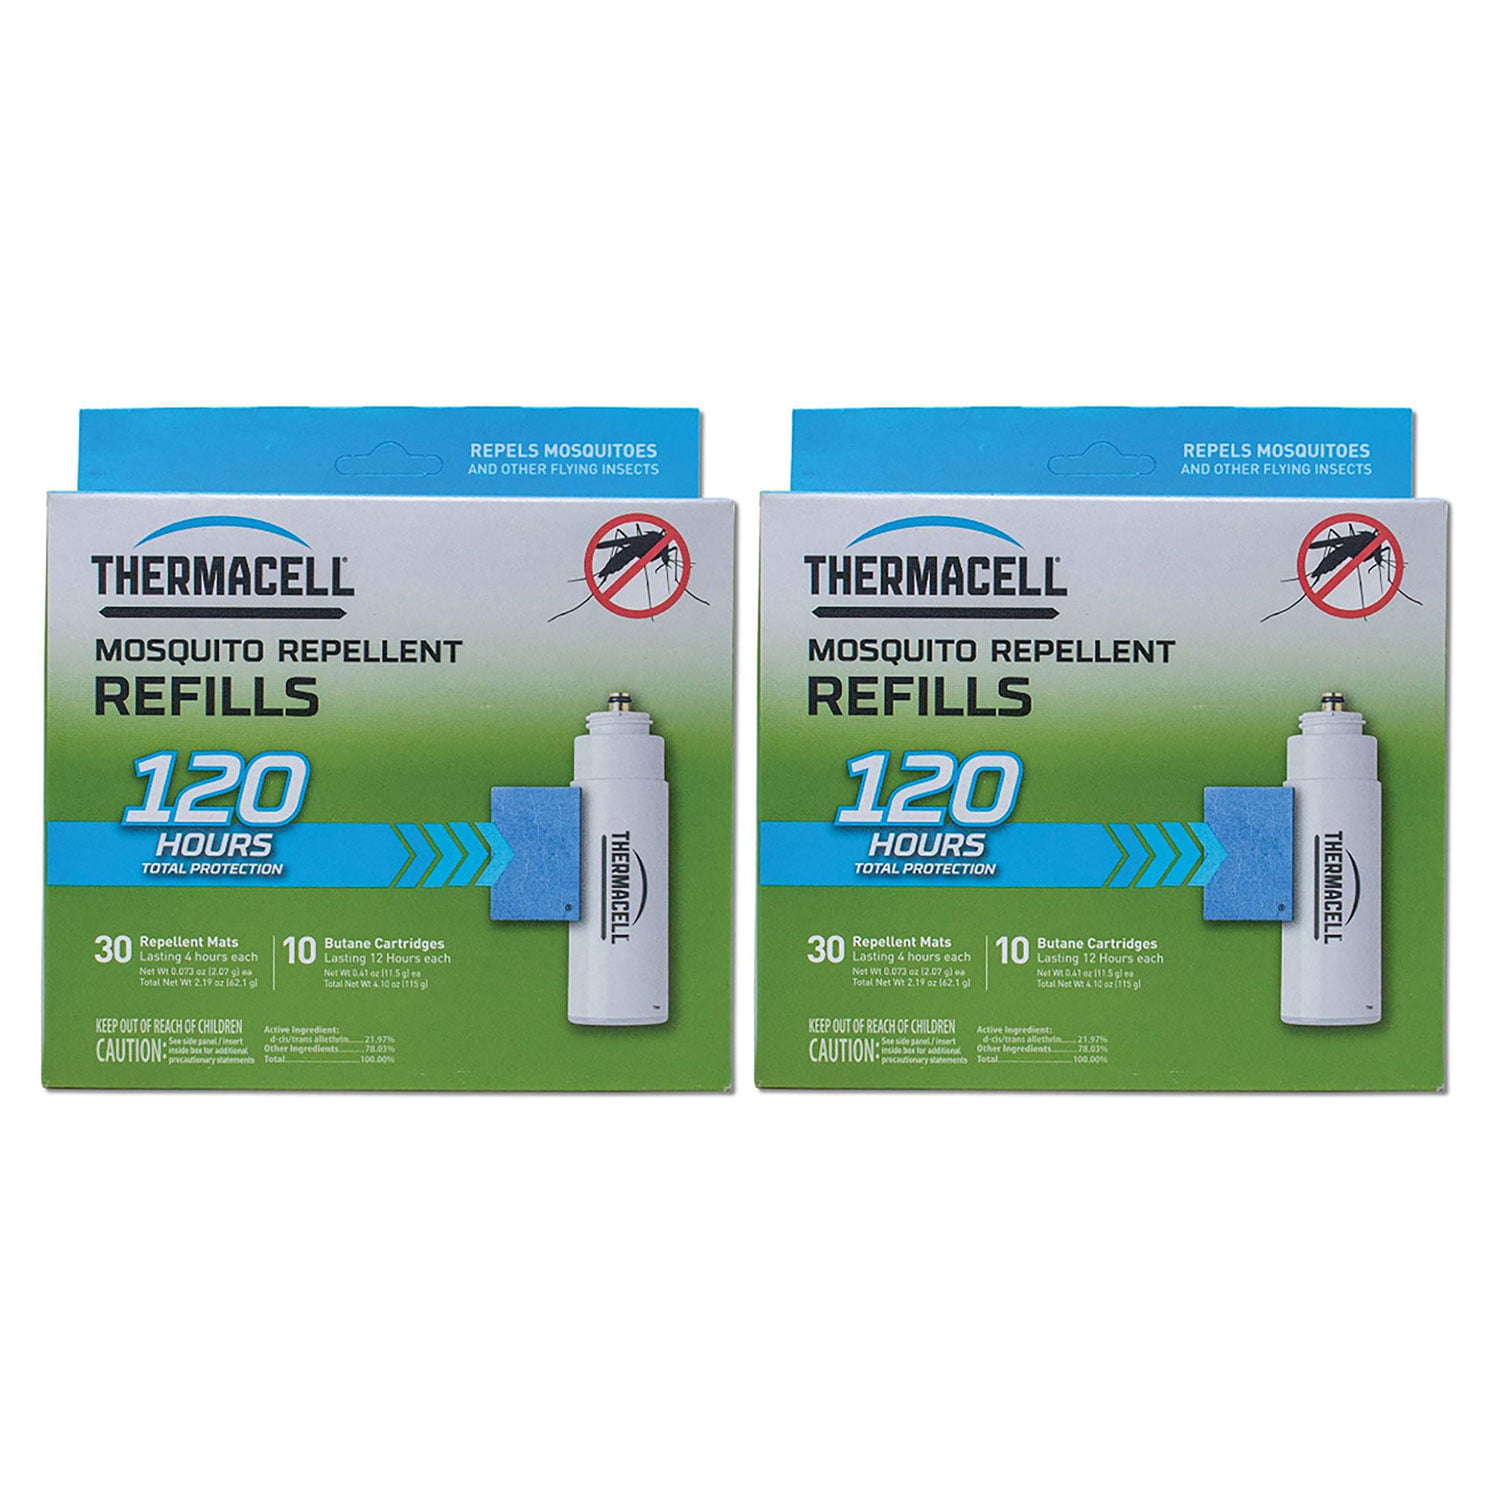 120 240 PCS RIDSECT MAT TABLET  MOSQUITO REPELLER  THERMACELL REFILL